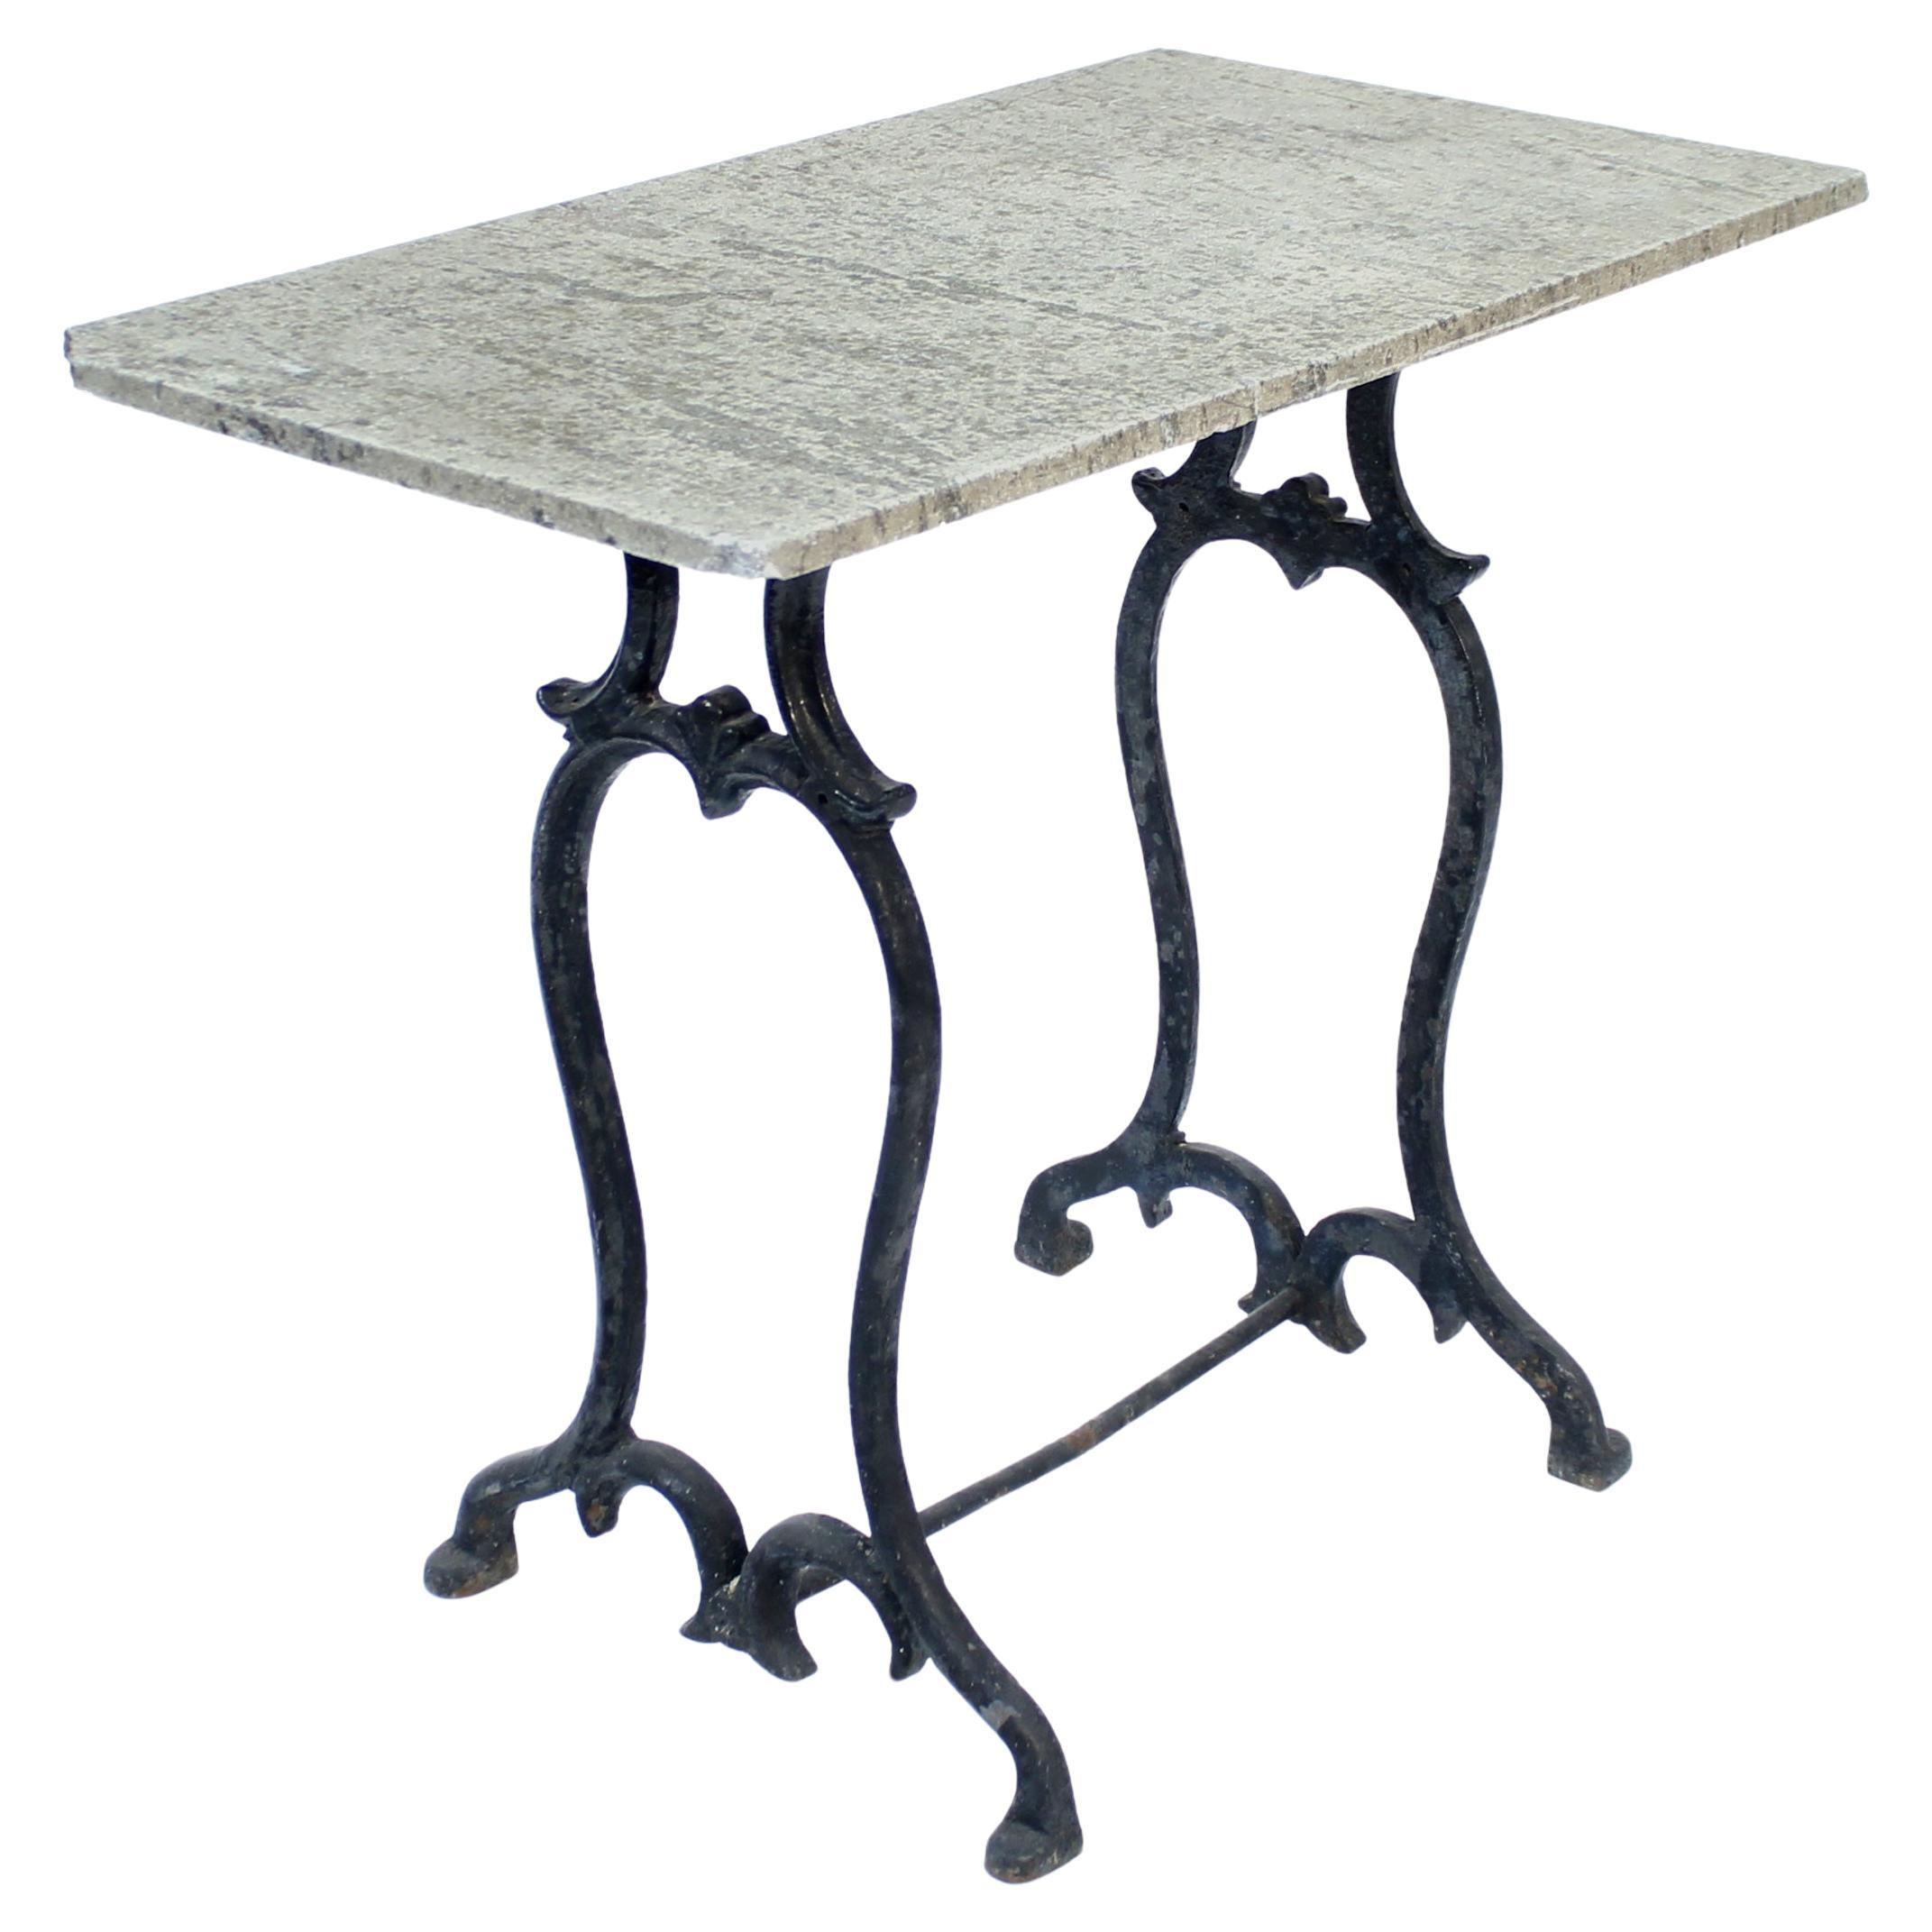 Swedish antique cast iron garden table with stone top, early 20th century